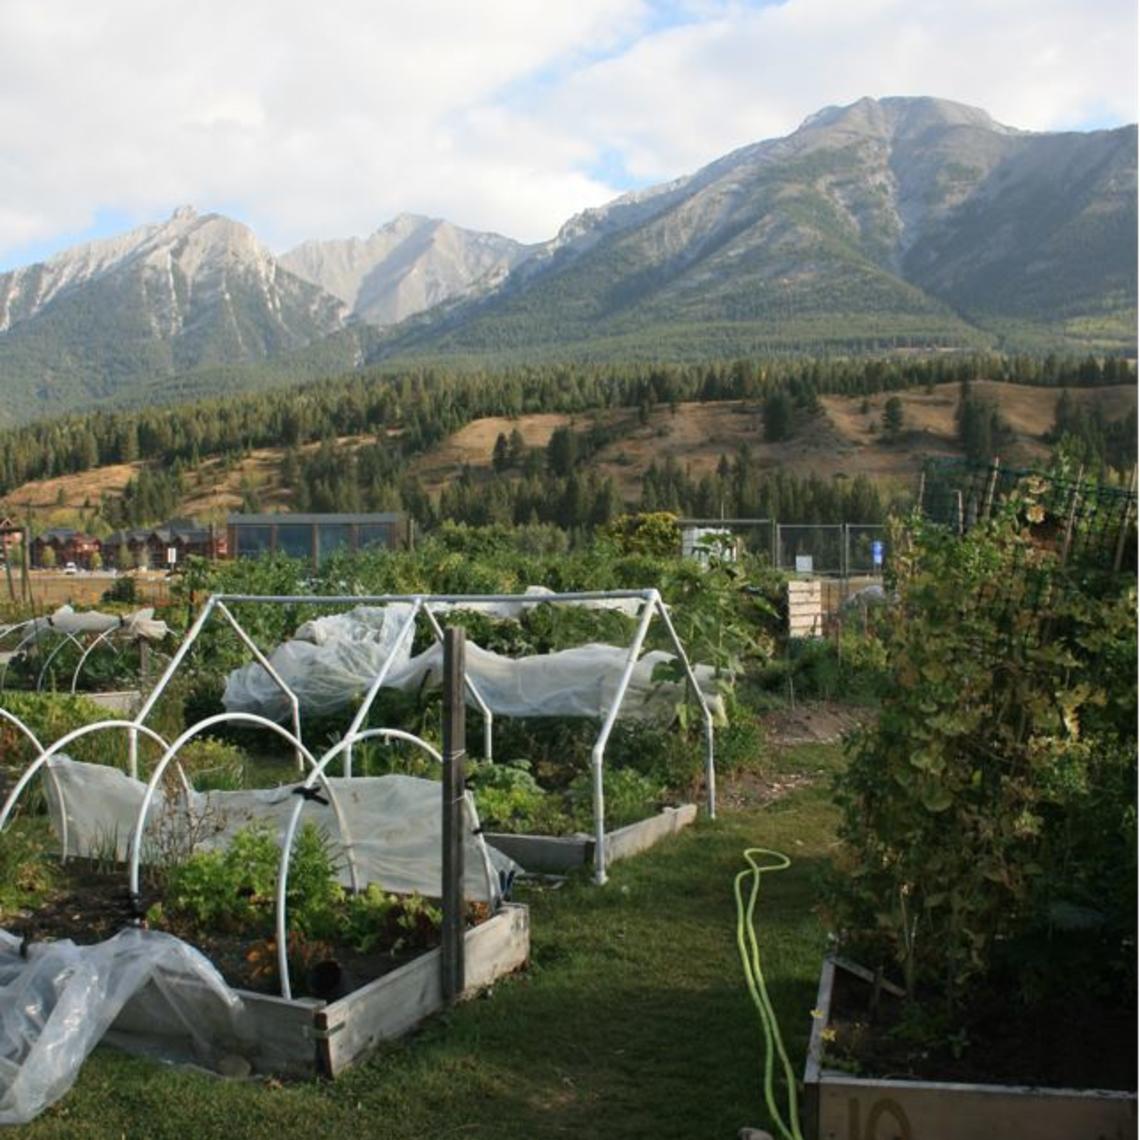 Community garden with mountains in the background